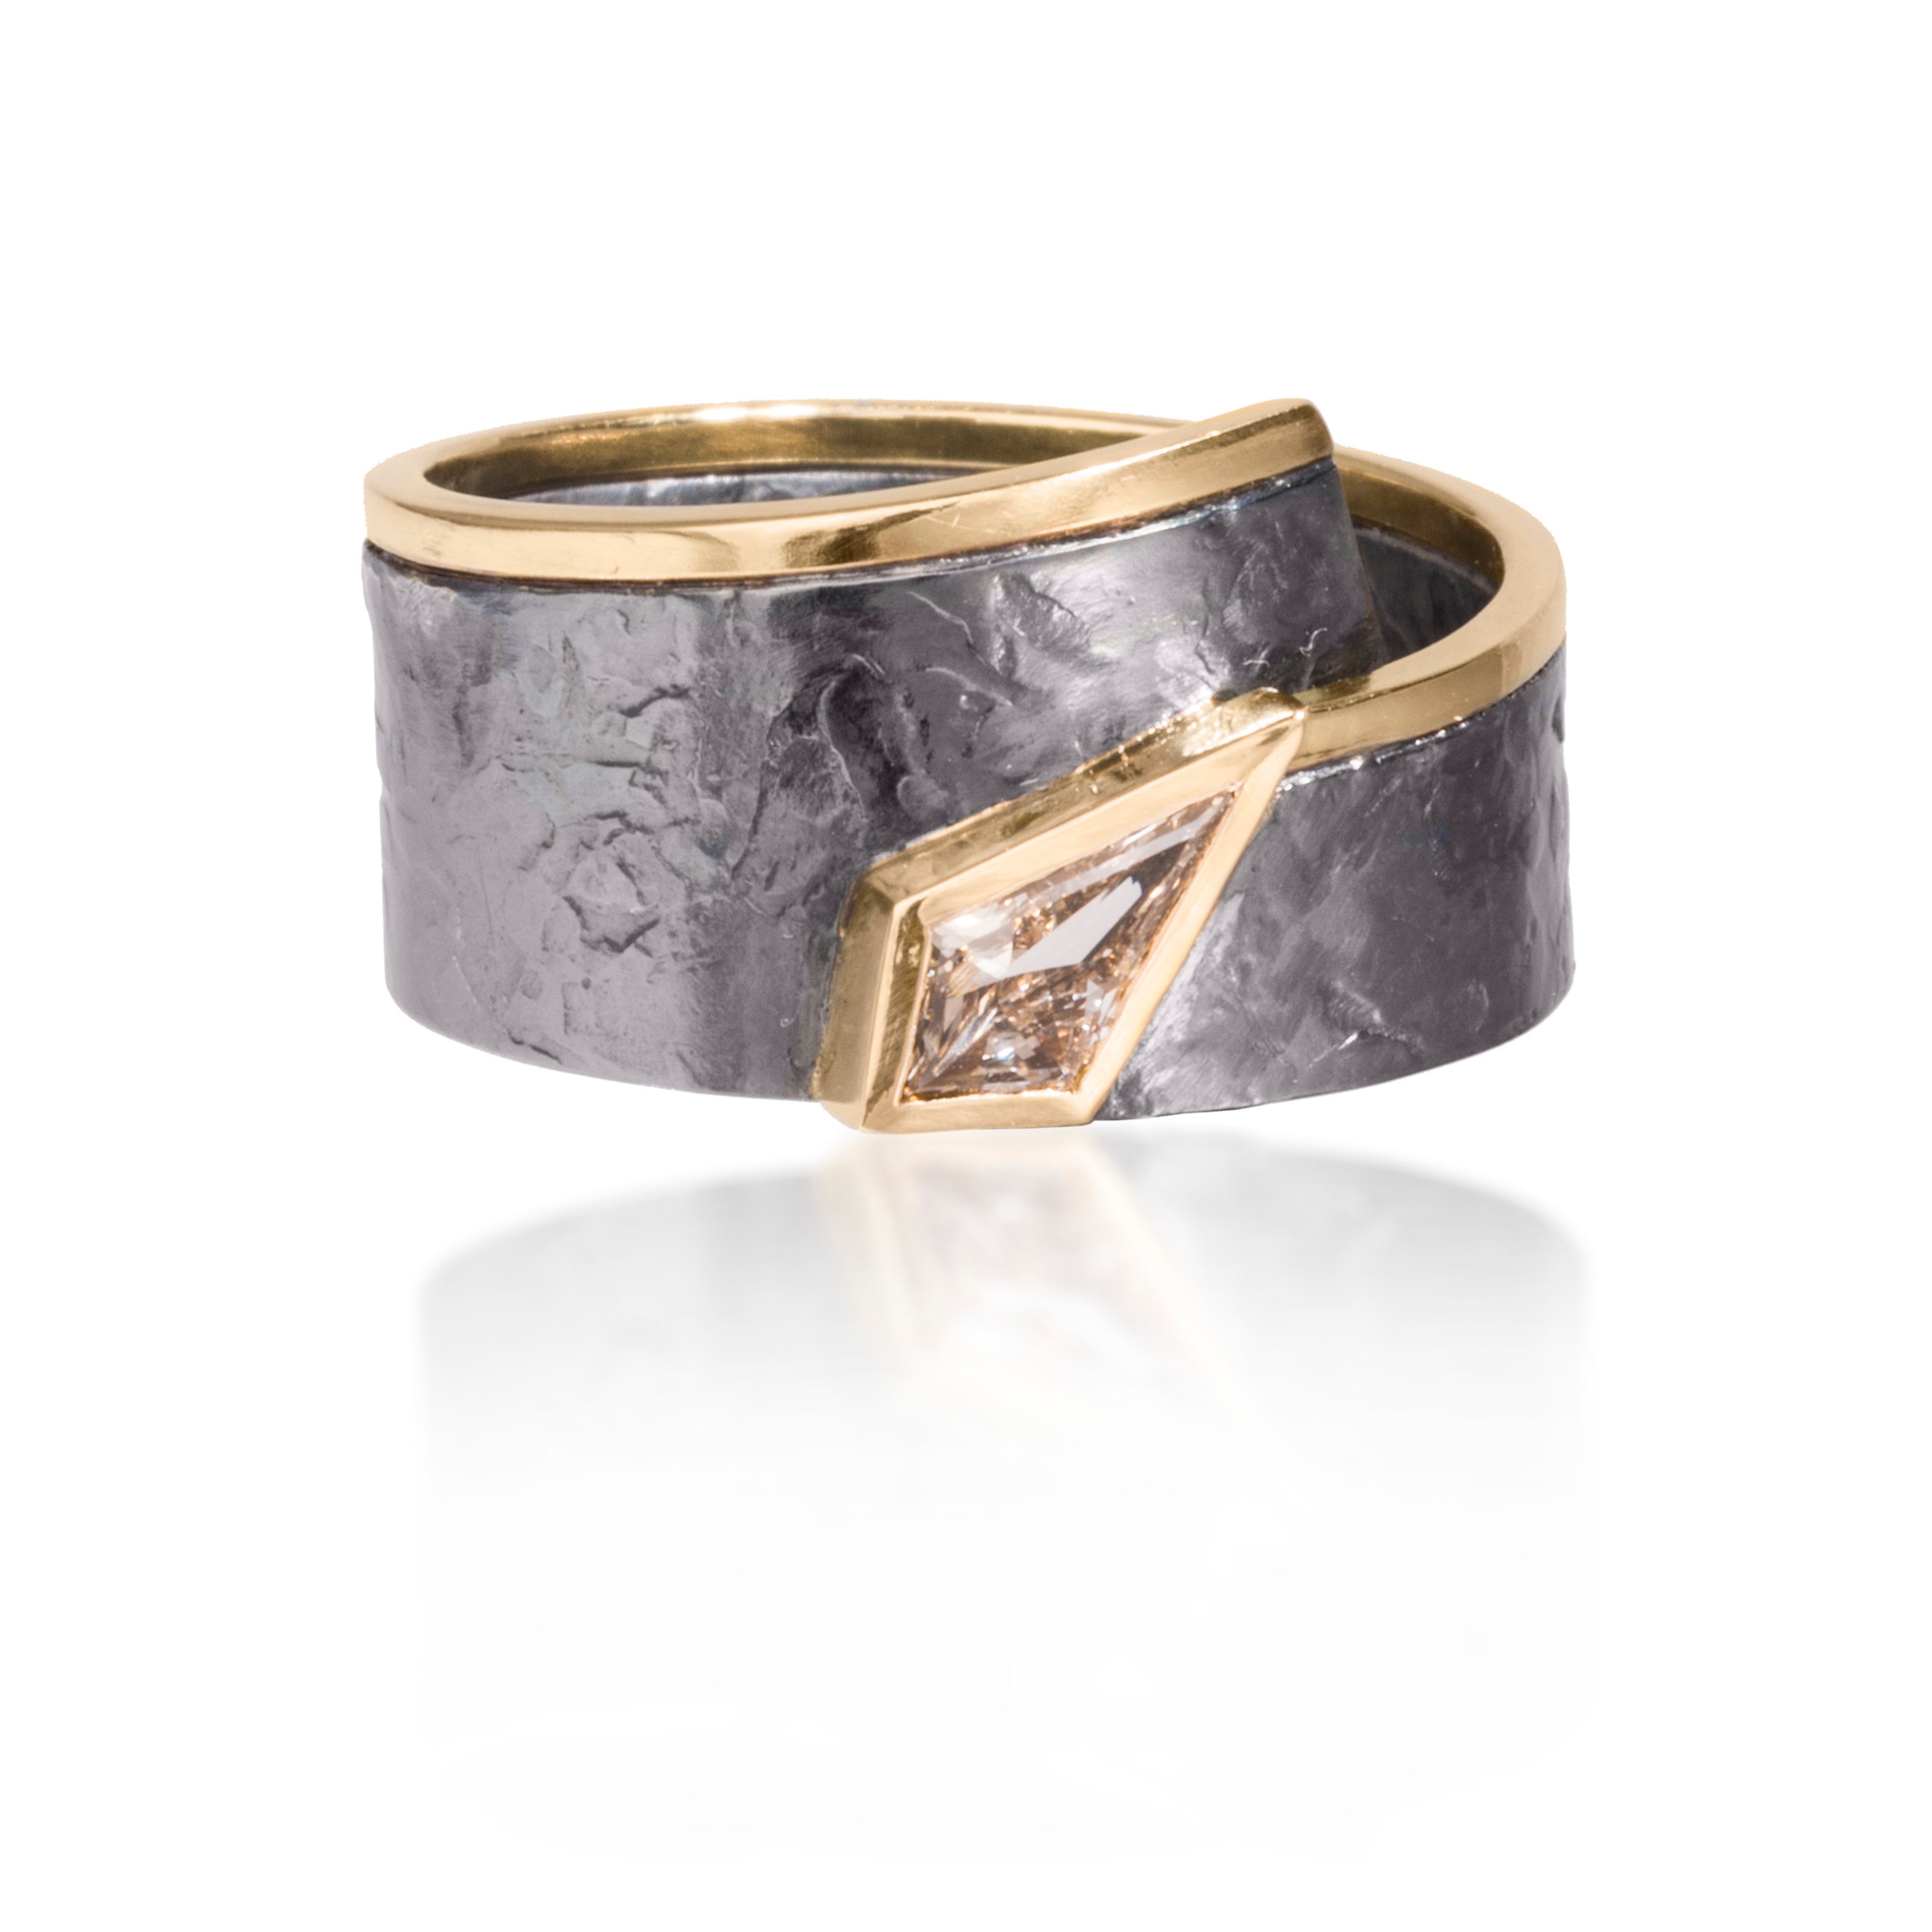 This simple, yet distinctive, one of kind ring in 18k gold and oxidized silver features a bezel set Kite shaped champagne diamond, 0.30 tcw.  It is forged, textured and fabricated by hand.  